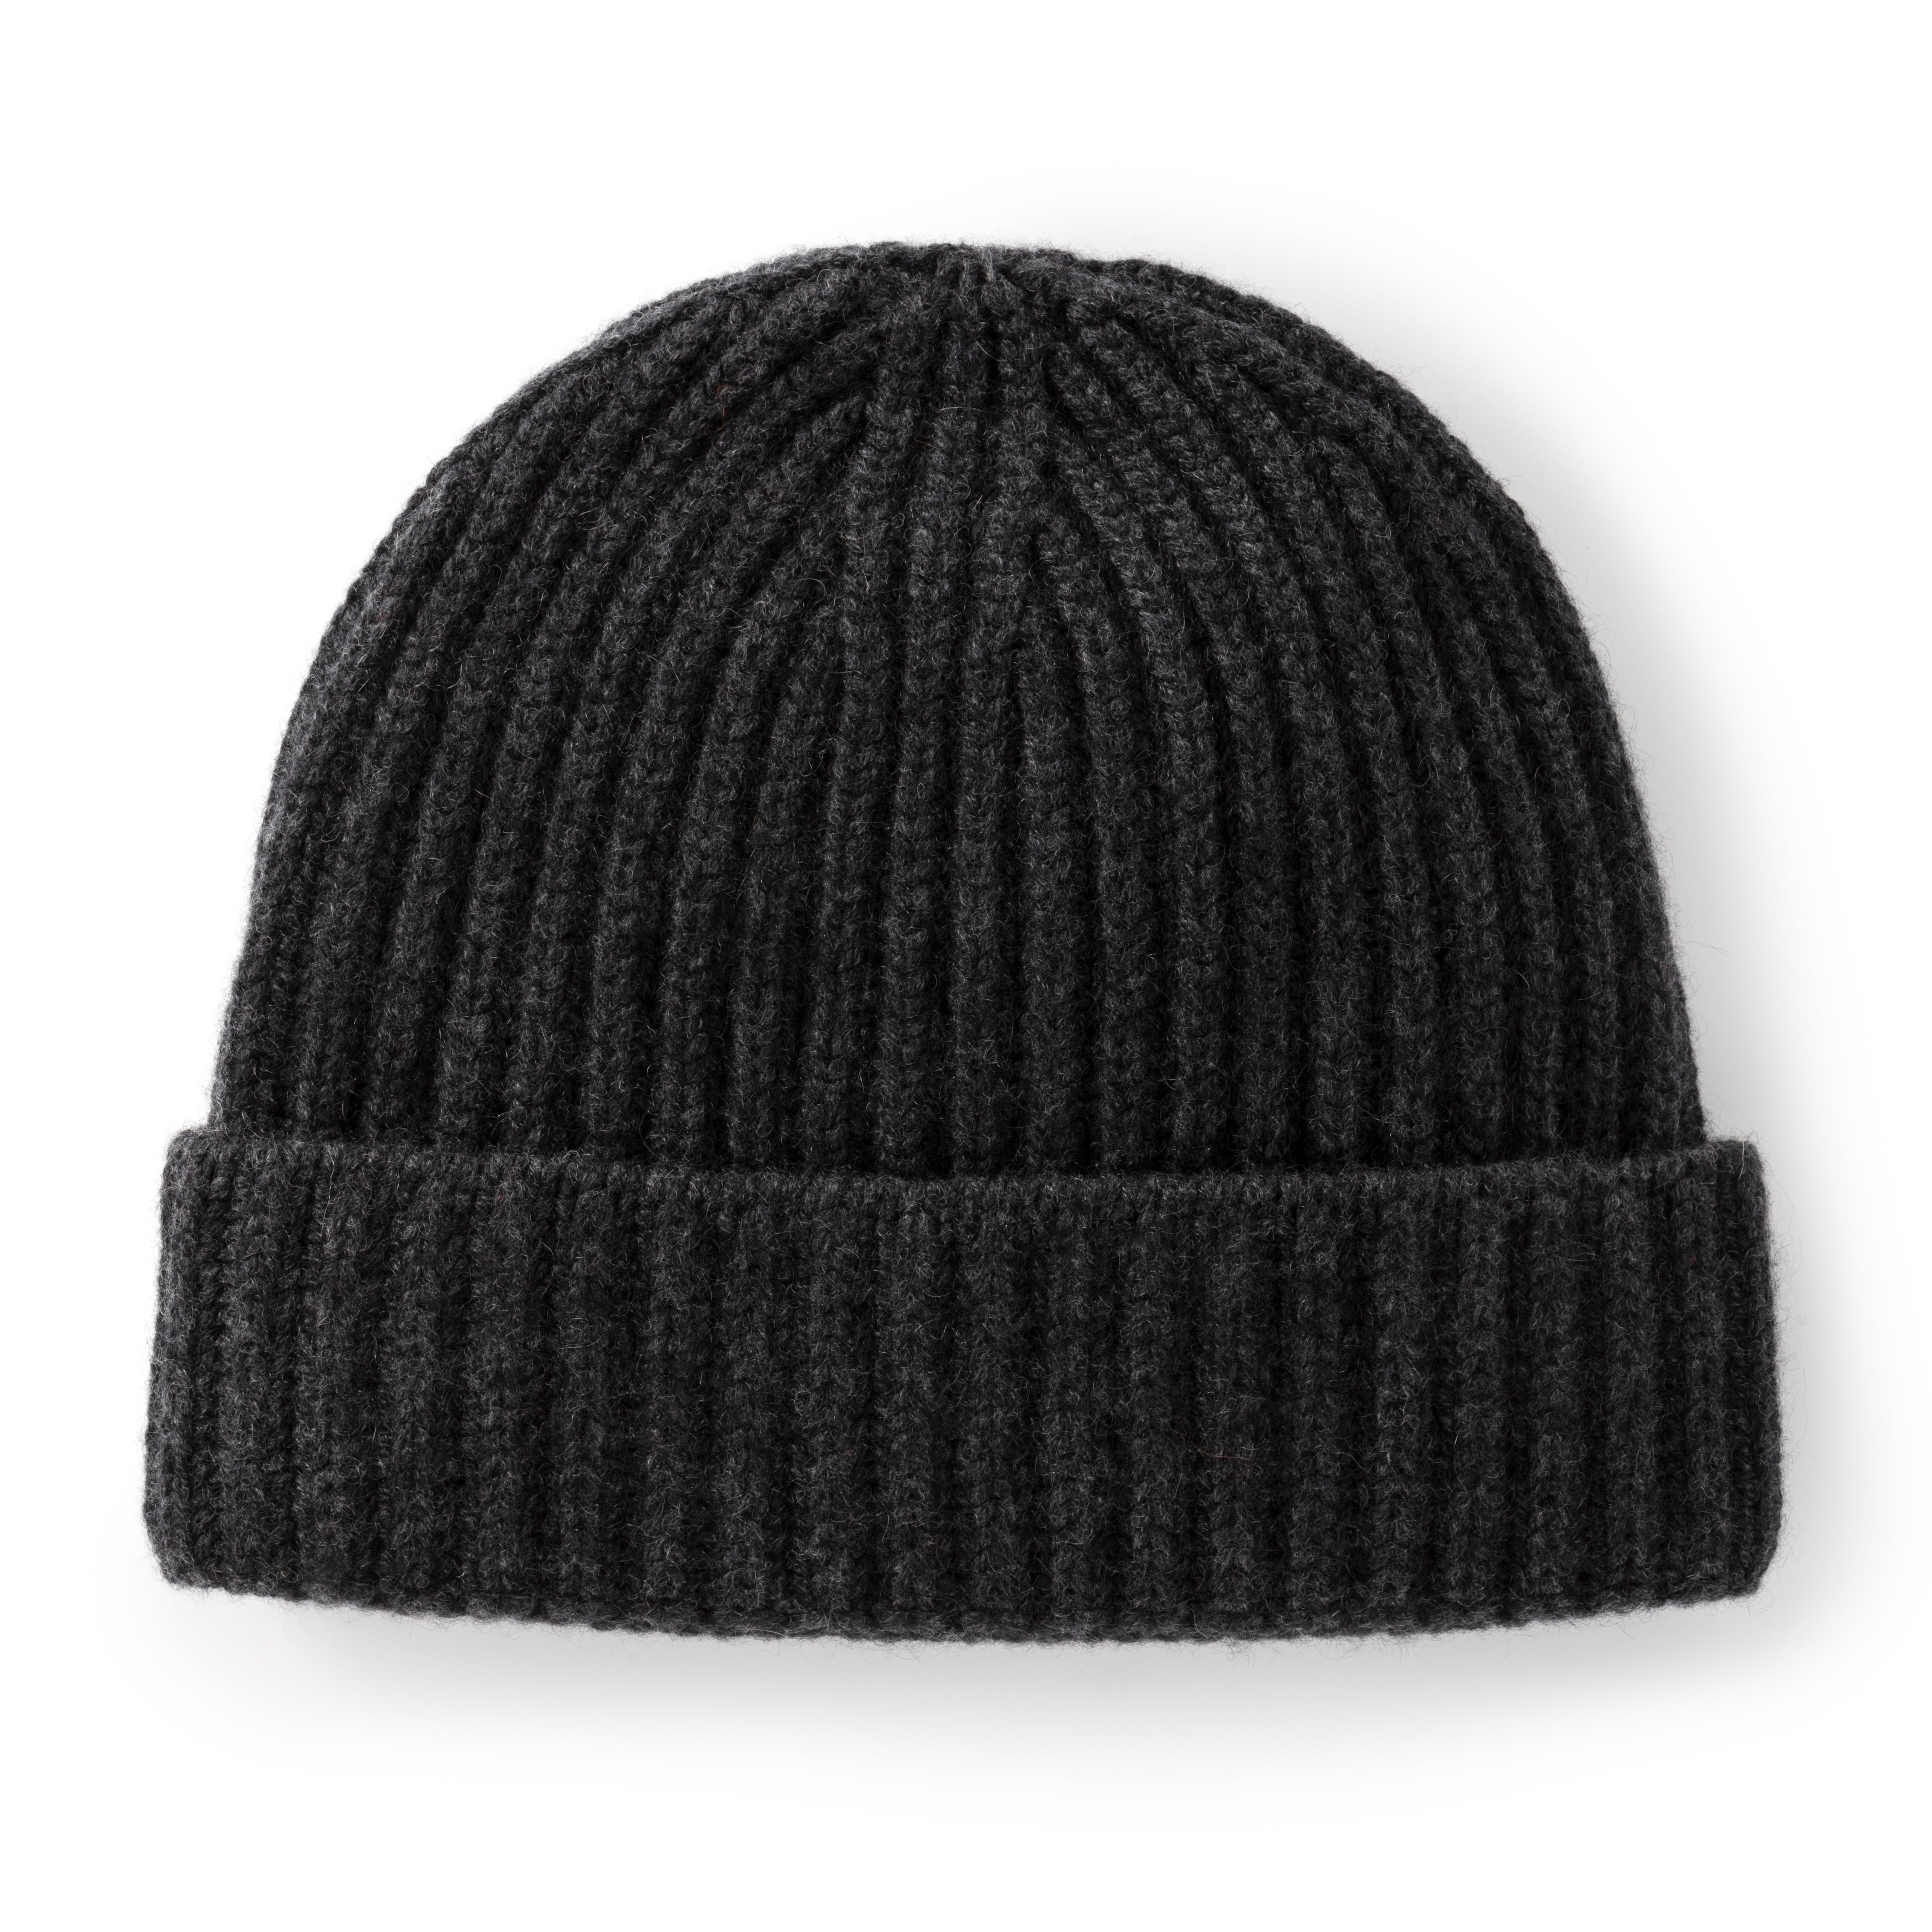 Charcoal Ribbed Cashmere Beanie - Emma Willis